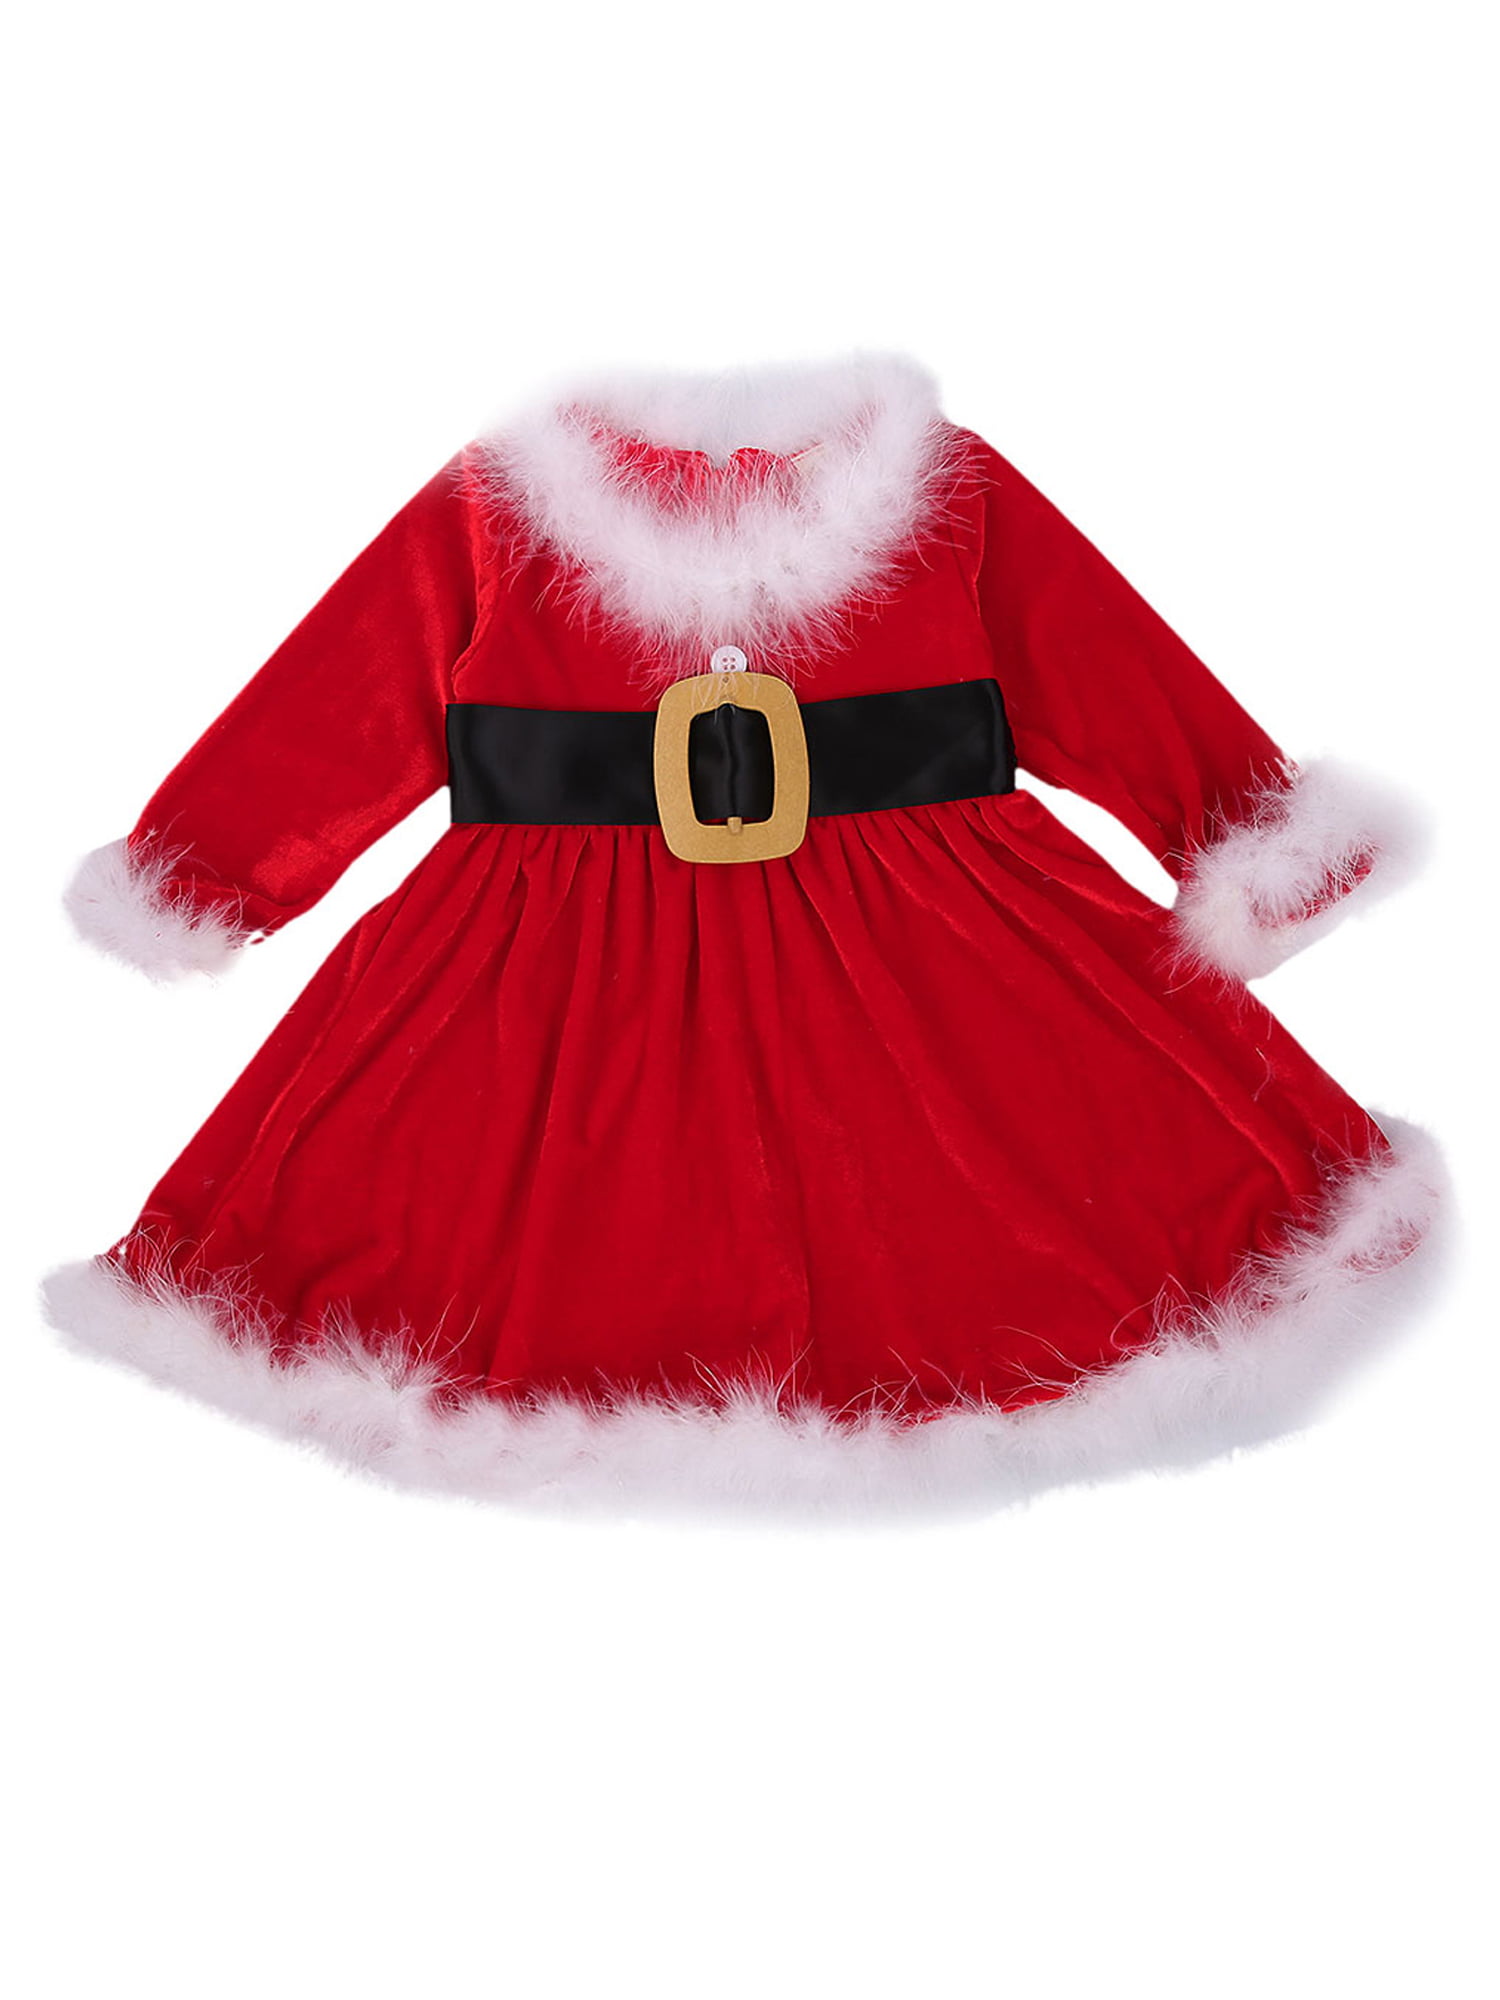 Toddler Girls Kids Christmas Costumes Santa Red Princess Dresses Outfits Costume 